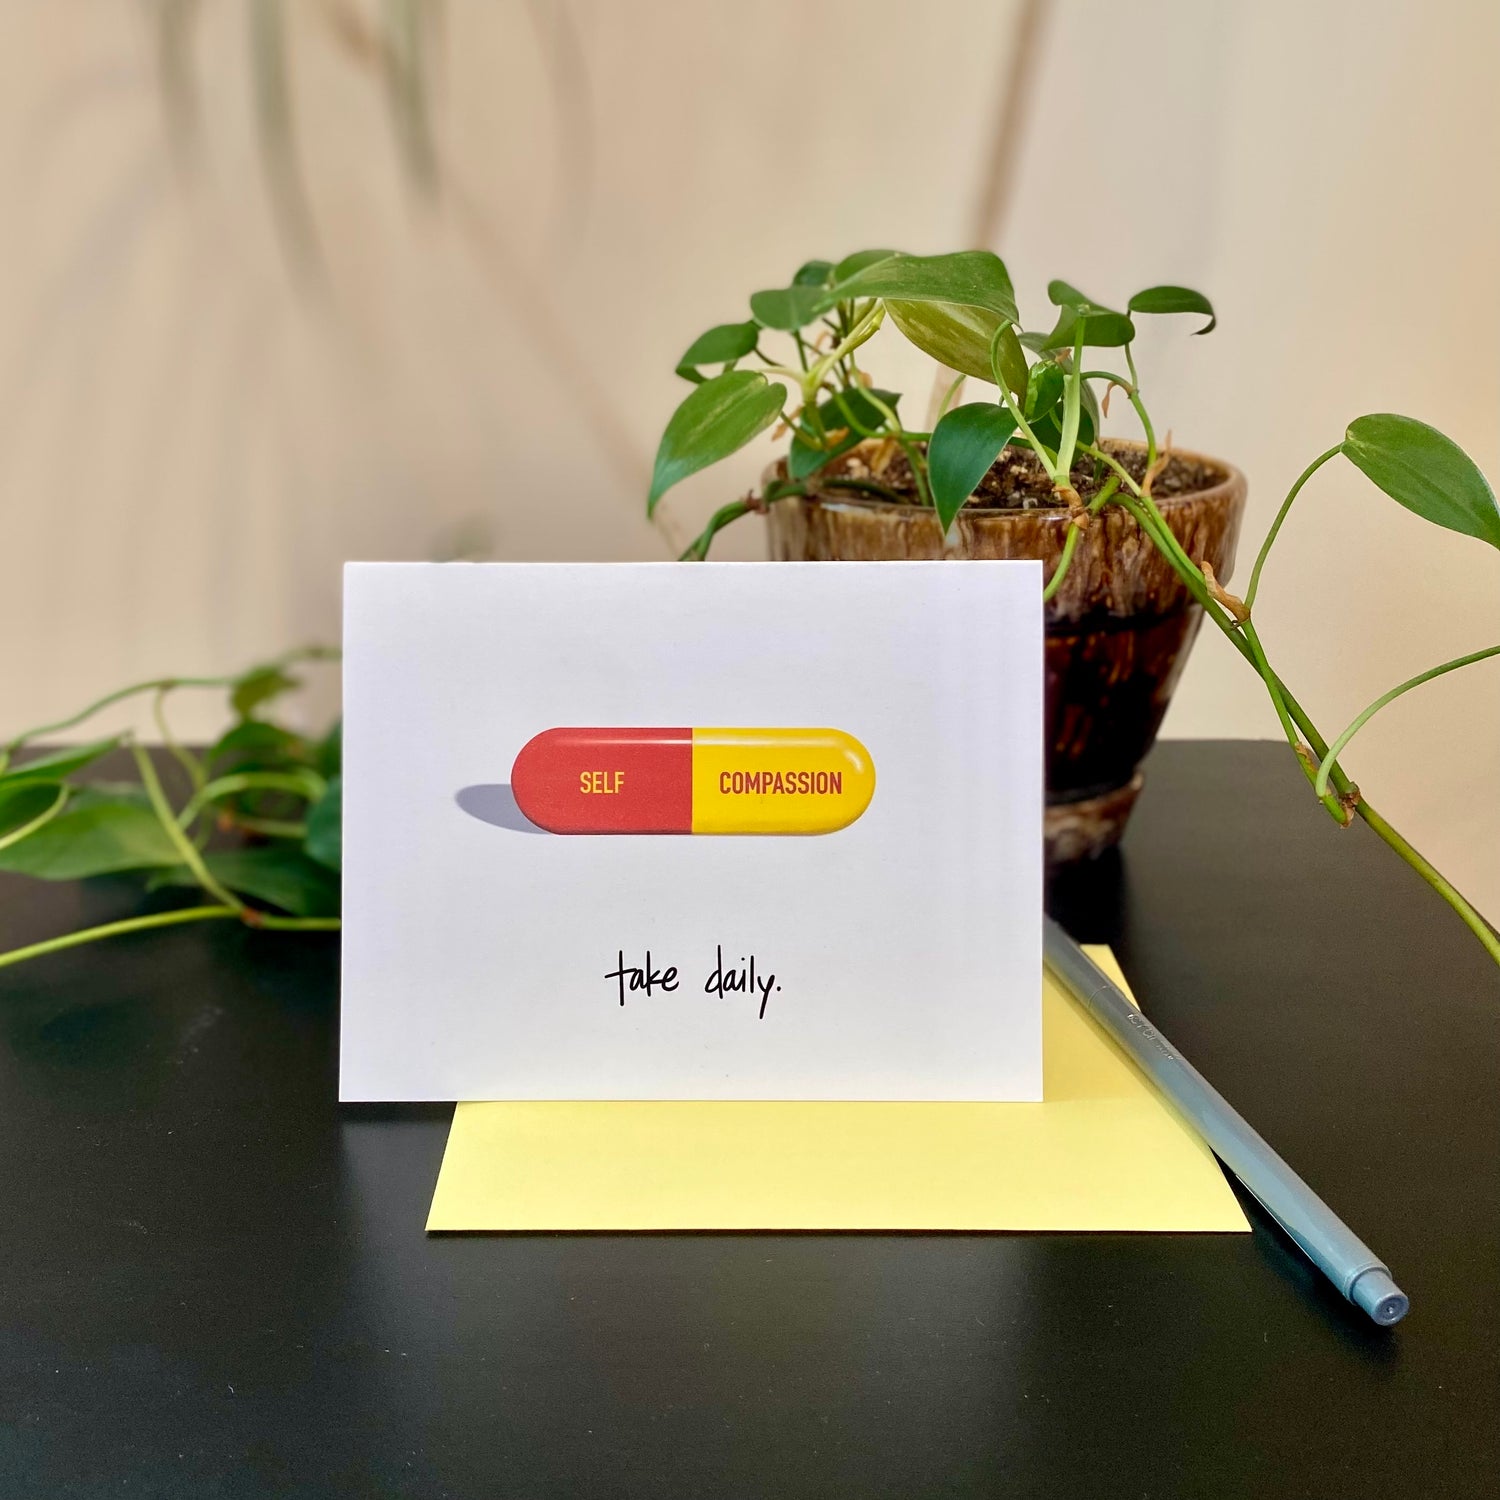 Greeting card with red and yellow self compassion pill and the text, "take daily."